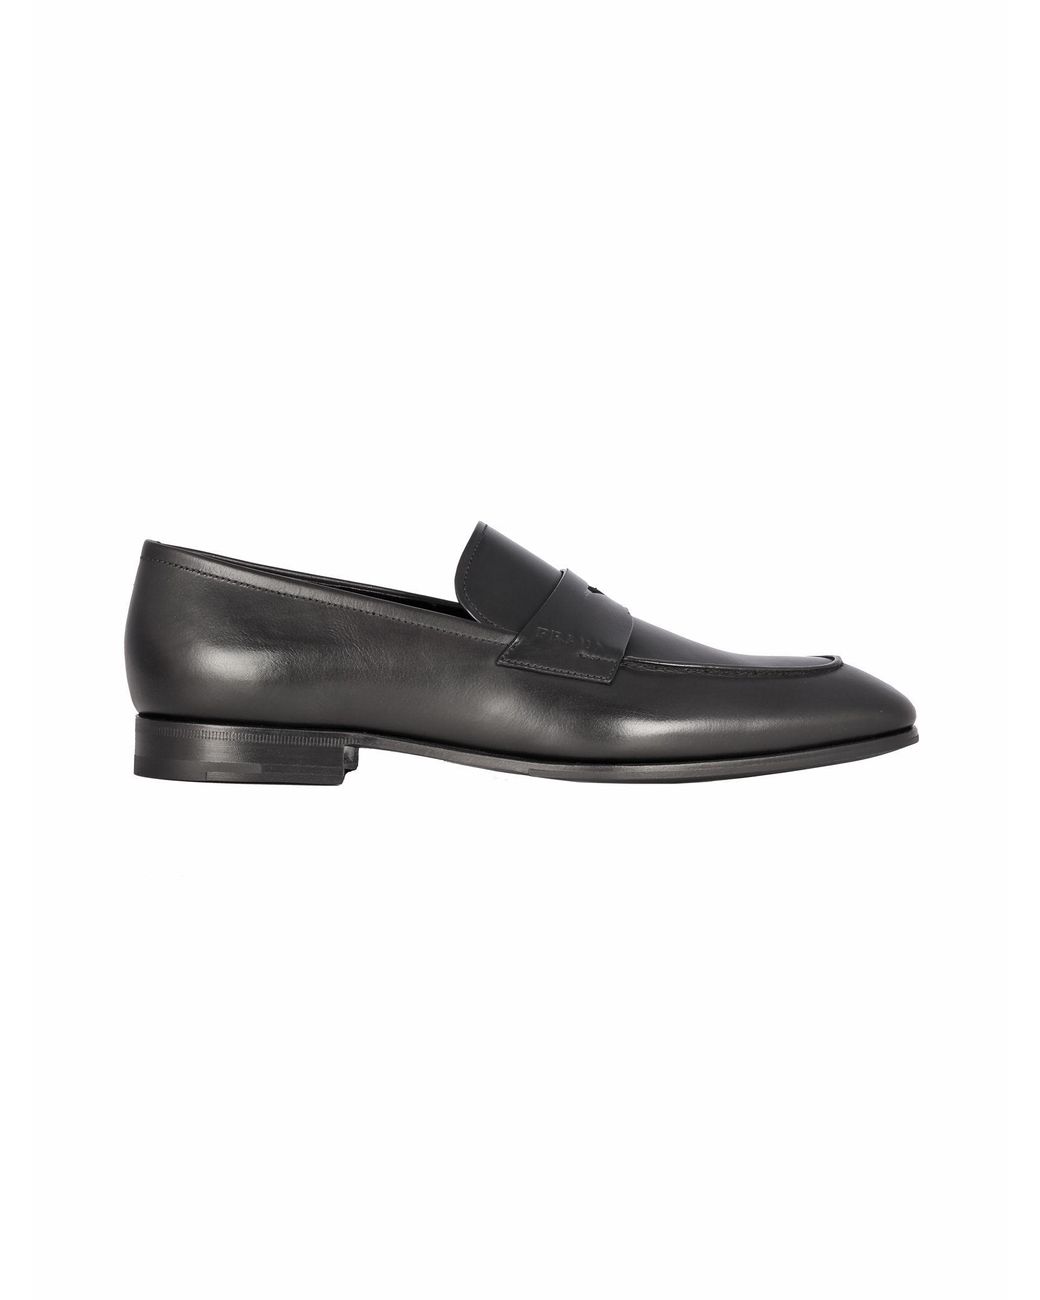 Prada Leather Loafers in Black for Men - Lyst